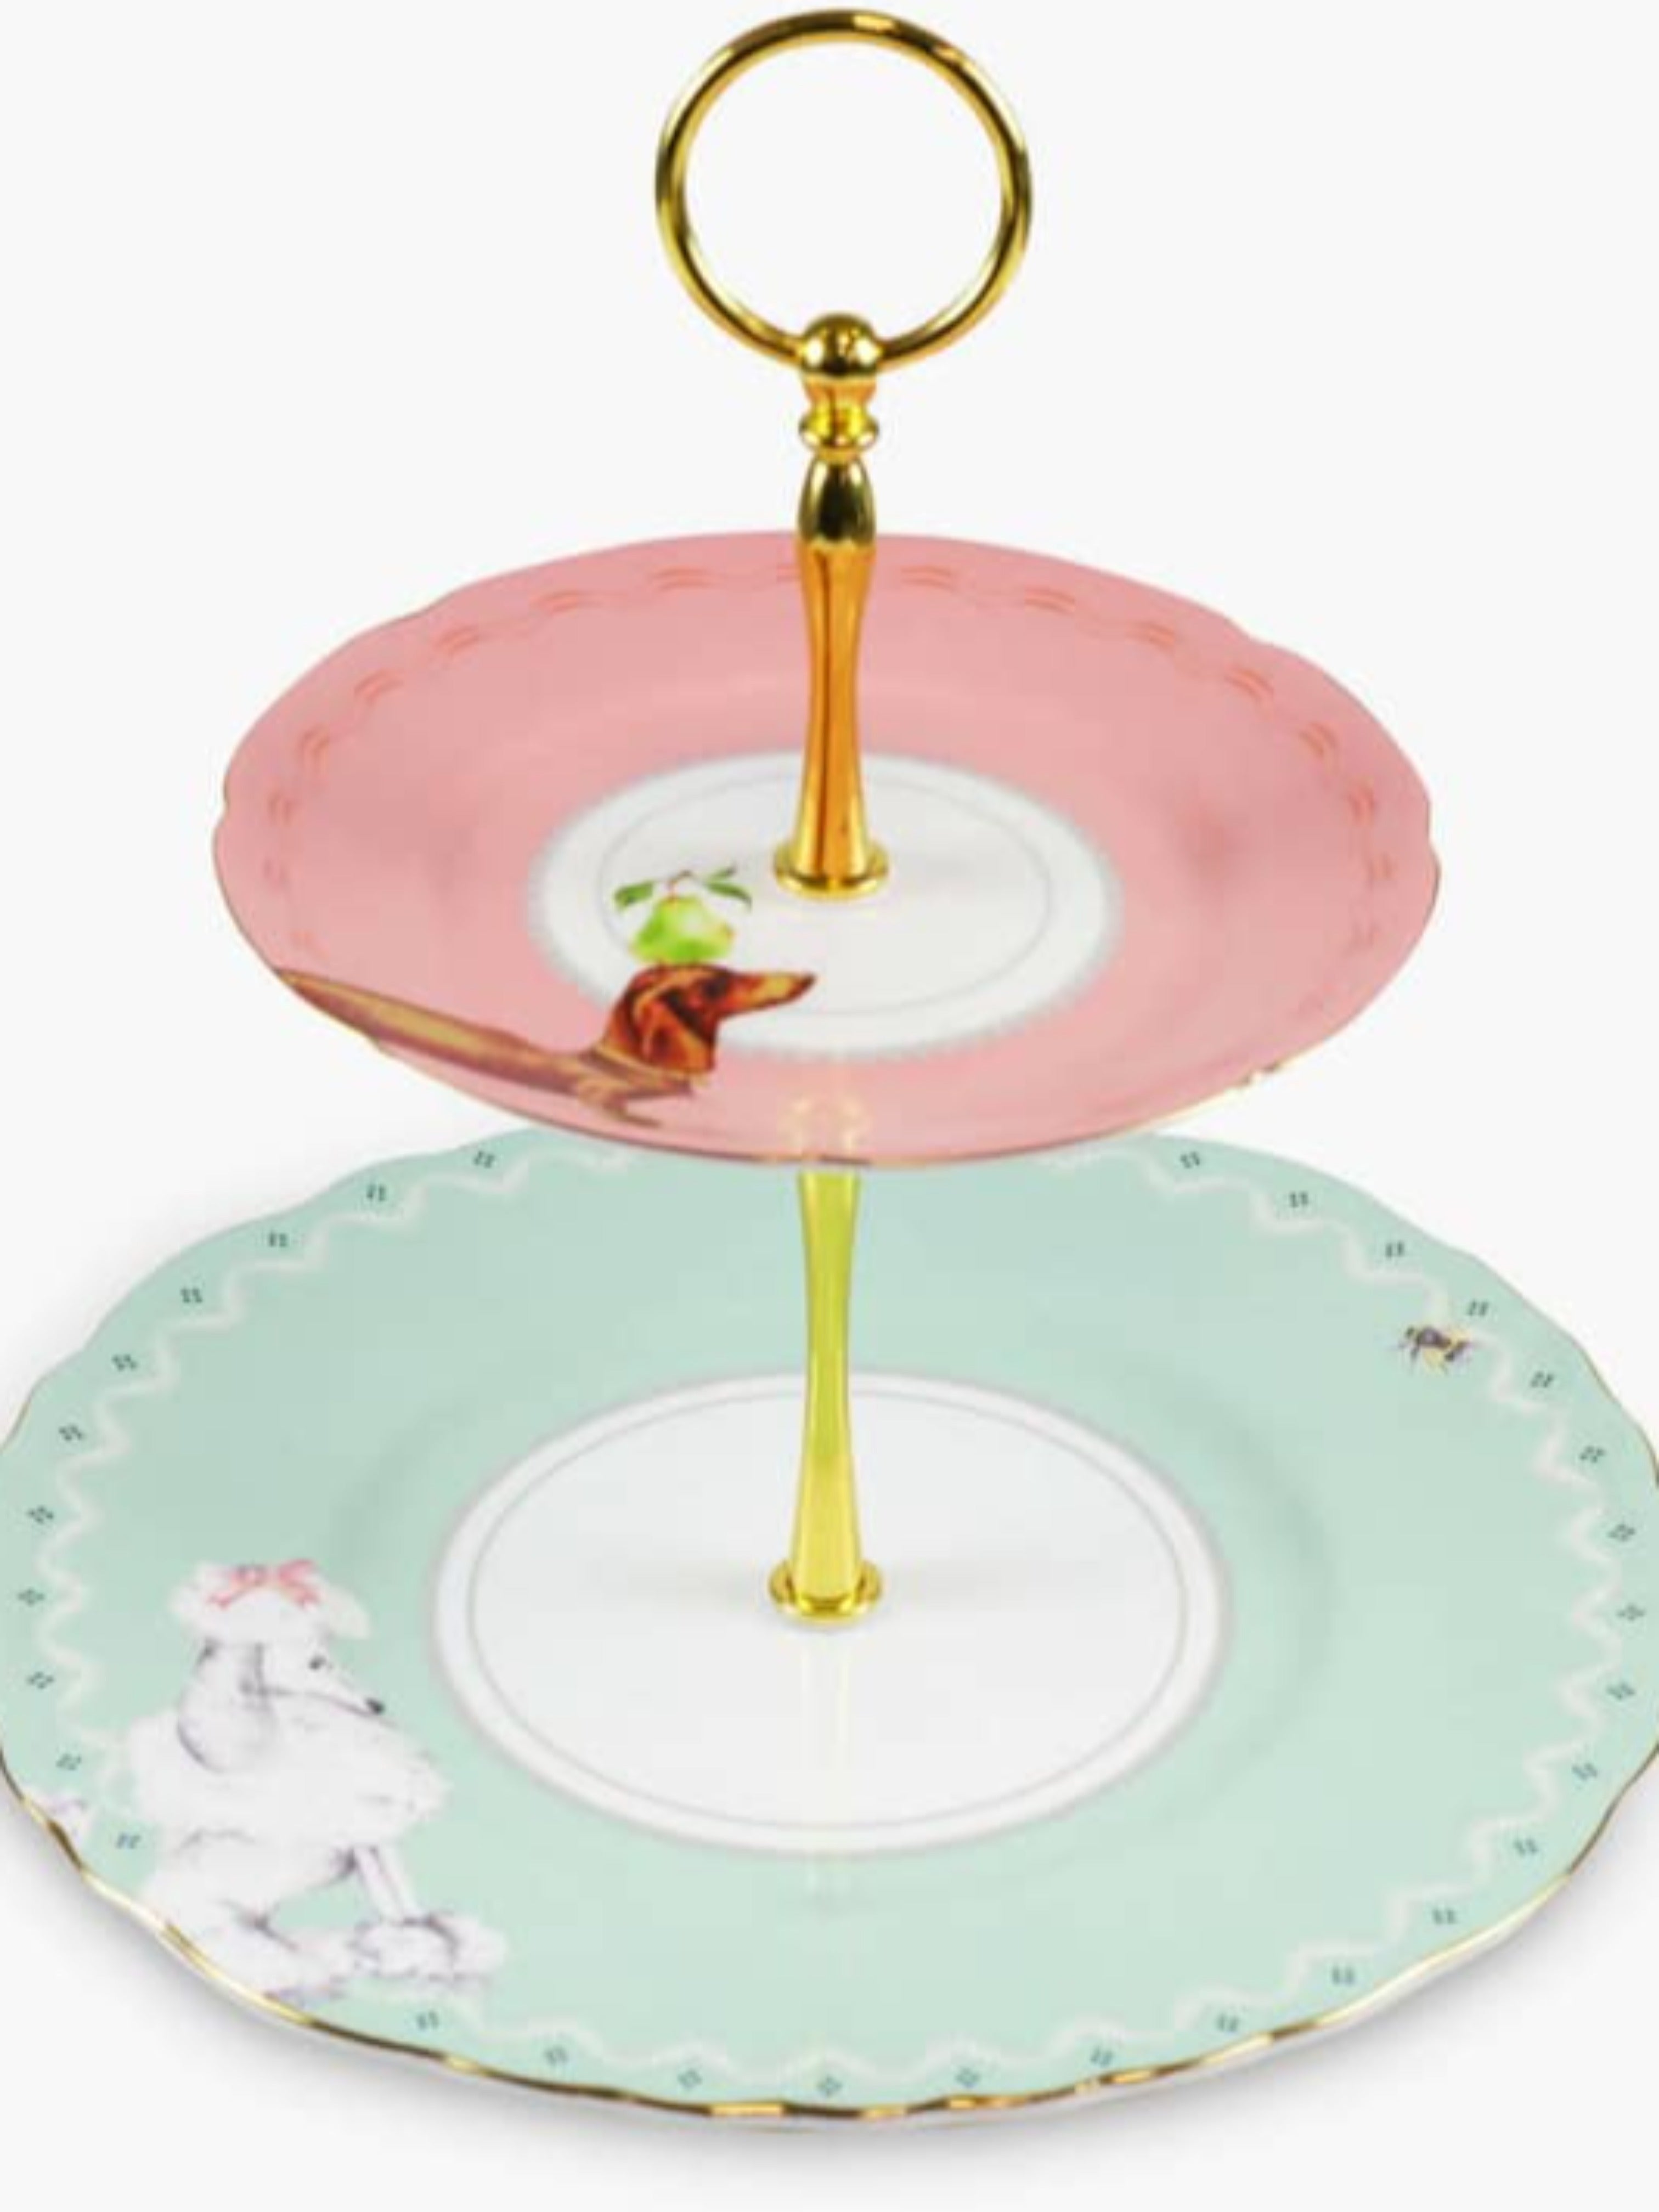 Yvonne Ellen Pretty Puppies Two Tier China Cake Stand